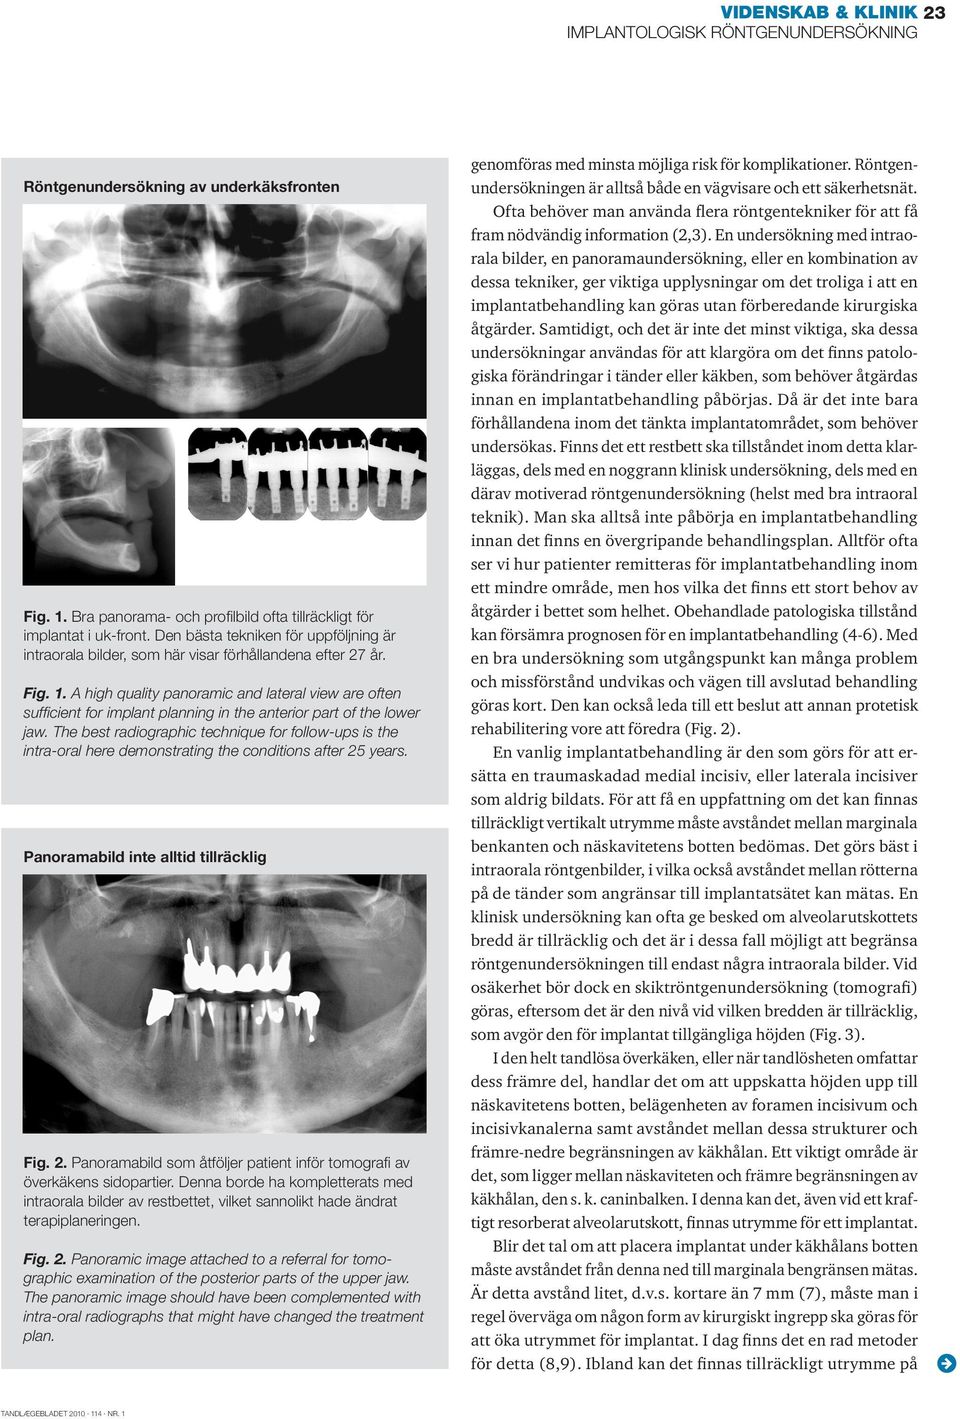 A high quality panoramic and lateral view are often sufficient for implant planning in the anterior part of the lower jaw.